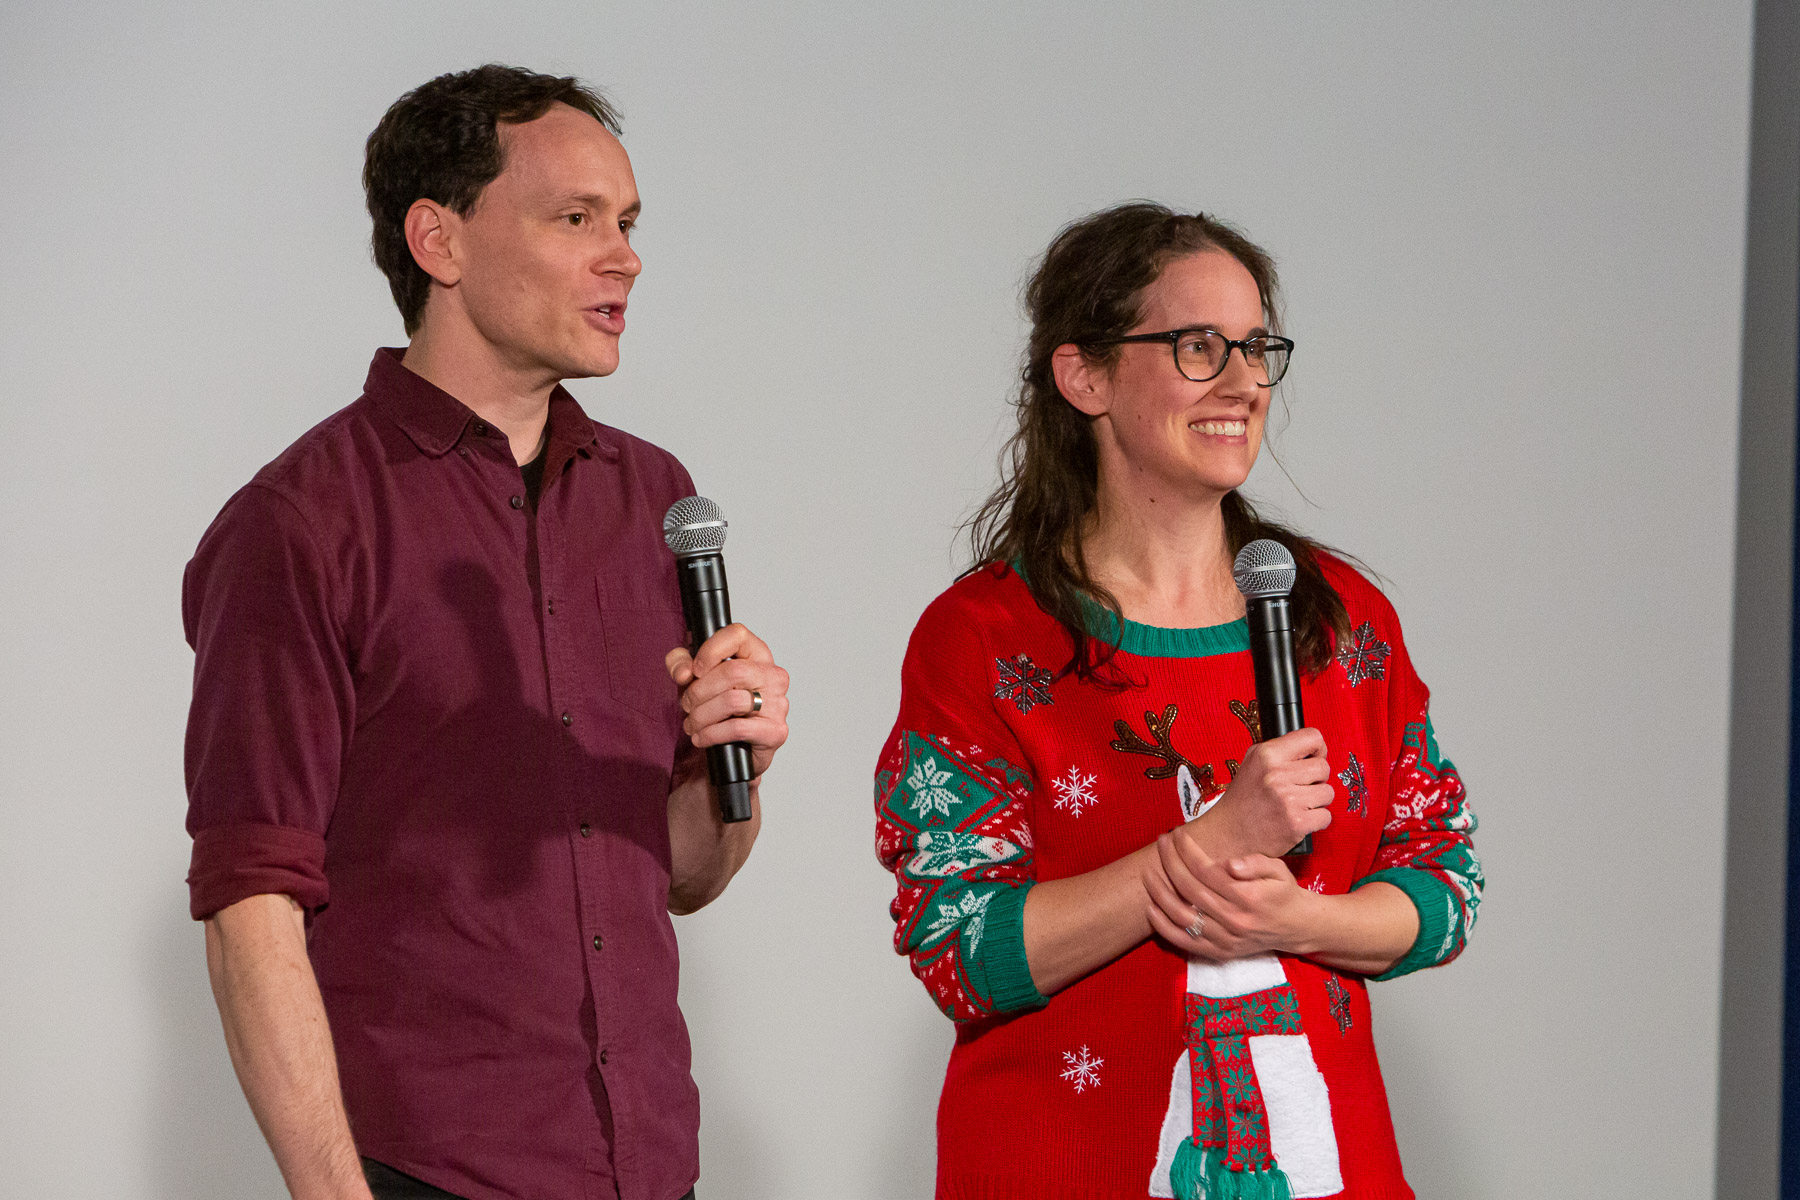 Devin Bell, left, and Meghann Artes, associate professors in the School of Cinematic Arts, answer questions from guests after presenting the release of “Merry Christmas from DePaul" for the first time. (DePaul University/Randall Spriggs)